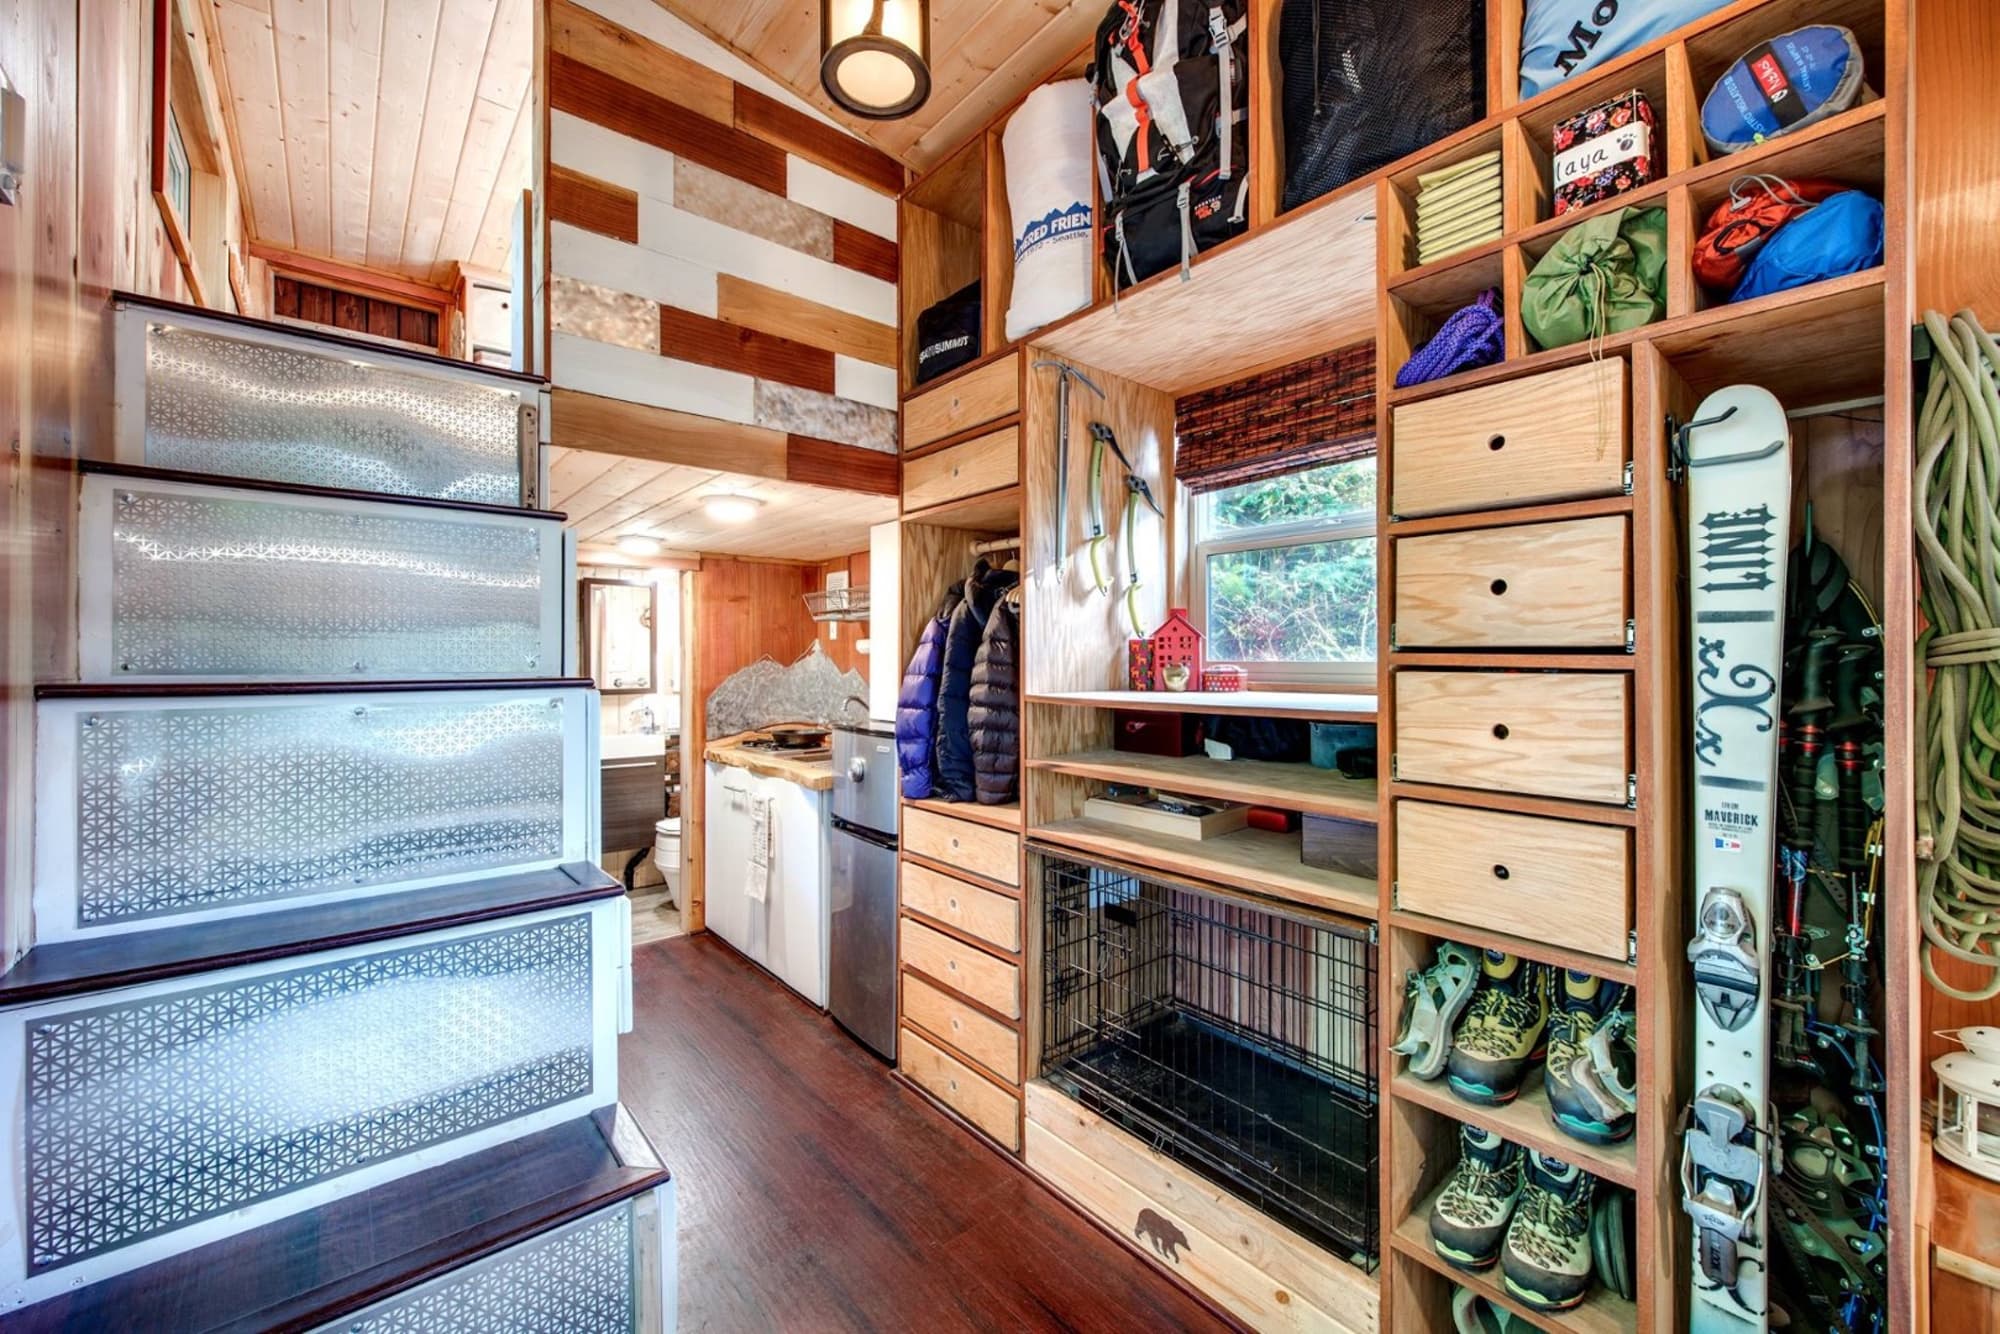 Engineer Couple Designs Incredible Off-Grid Tiny Home – Tiny House